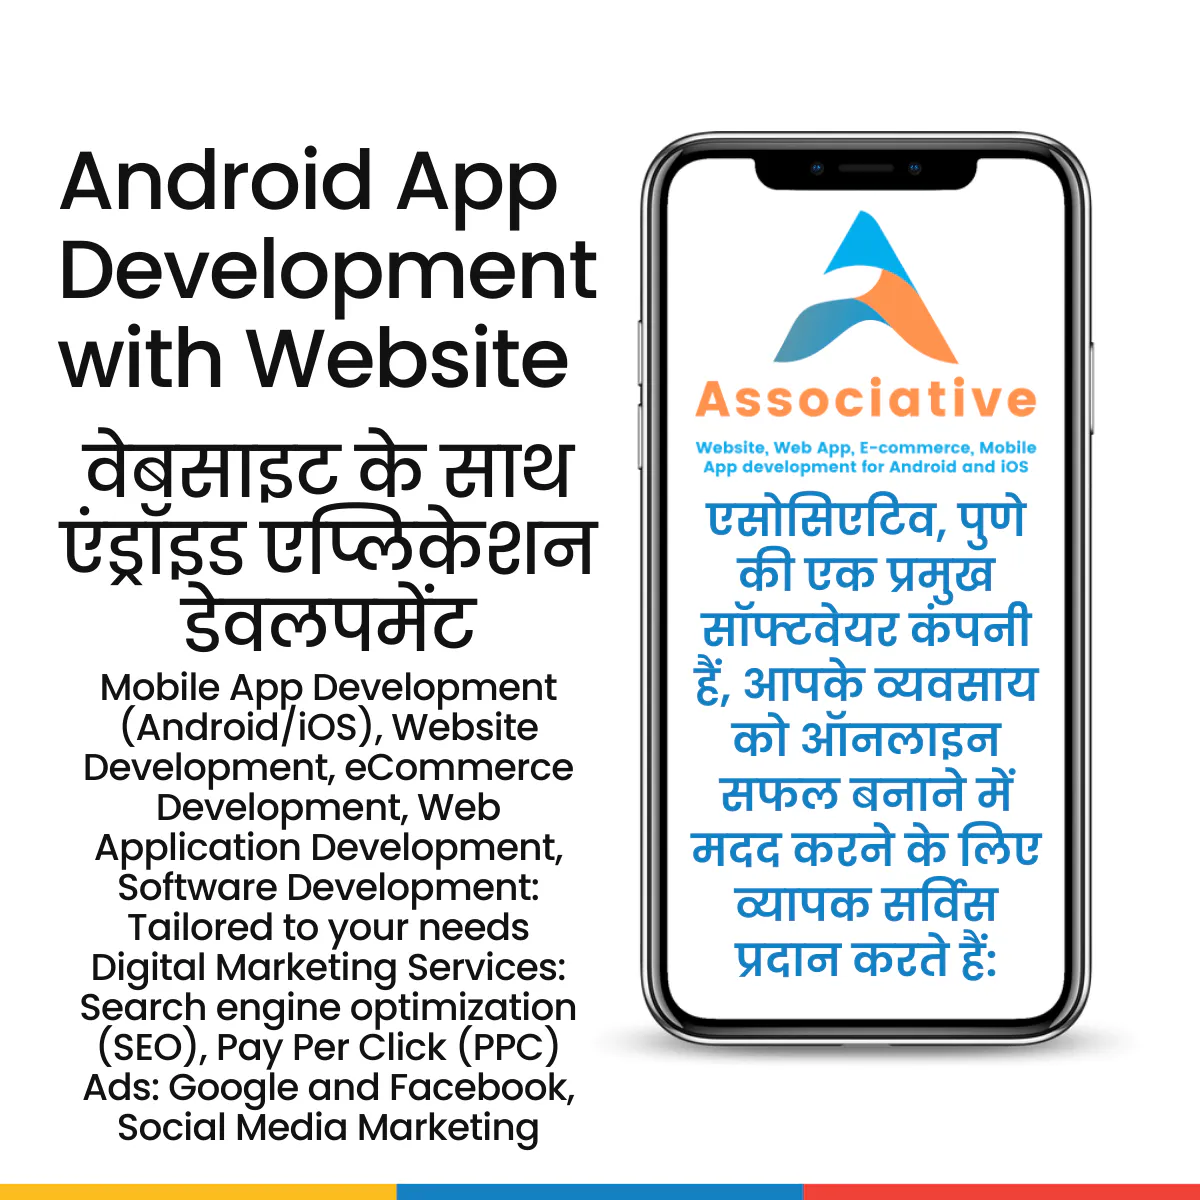 Android App Development with Website